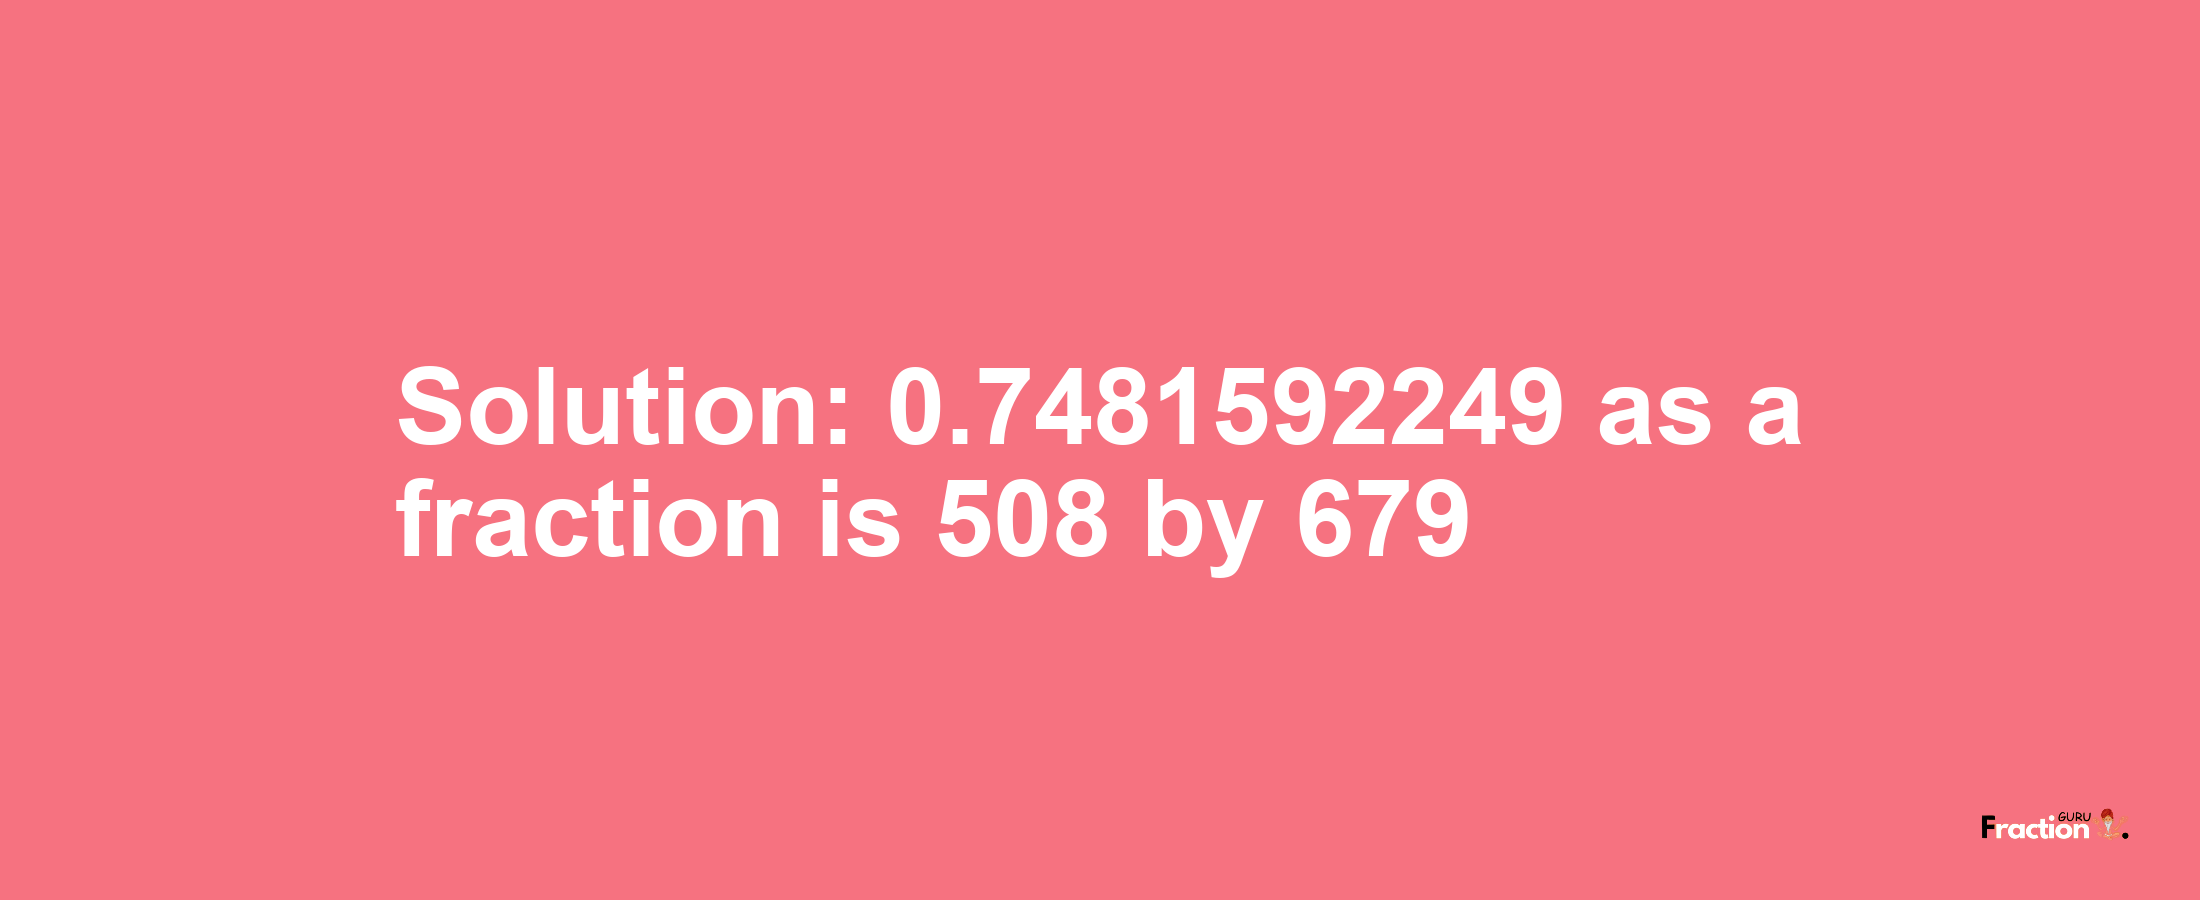 Solution:0.7481592249 as a fraction is 508/679